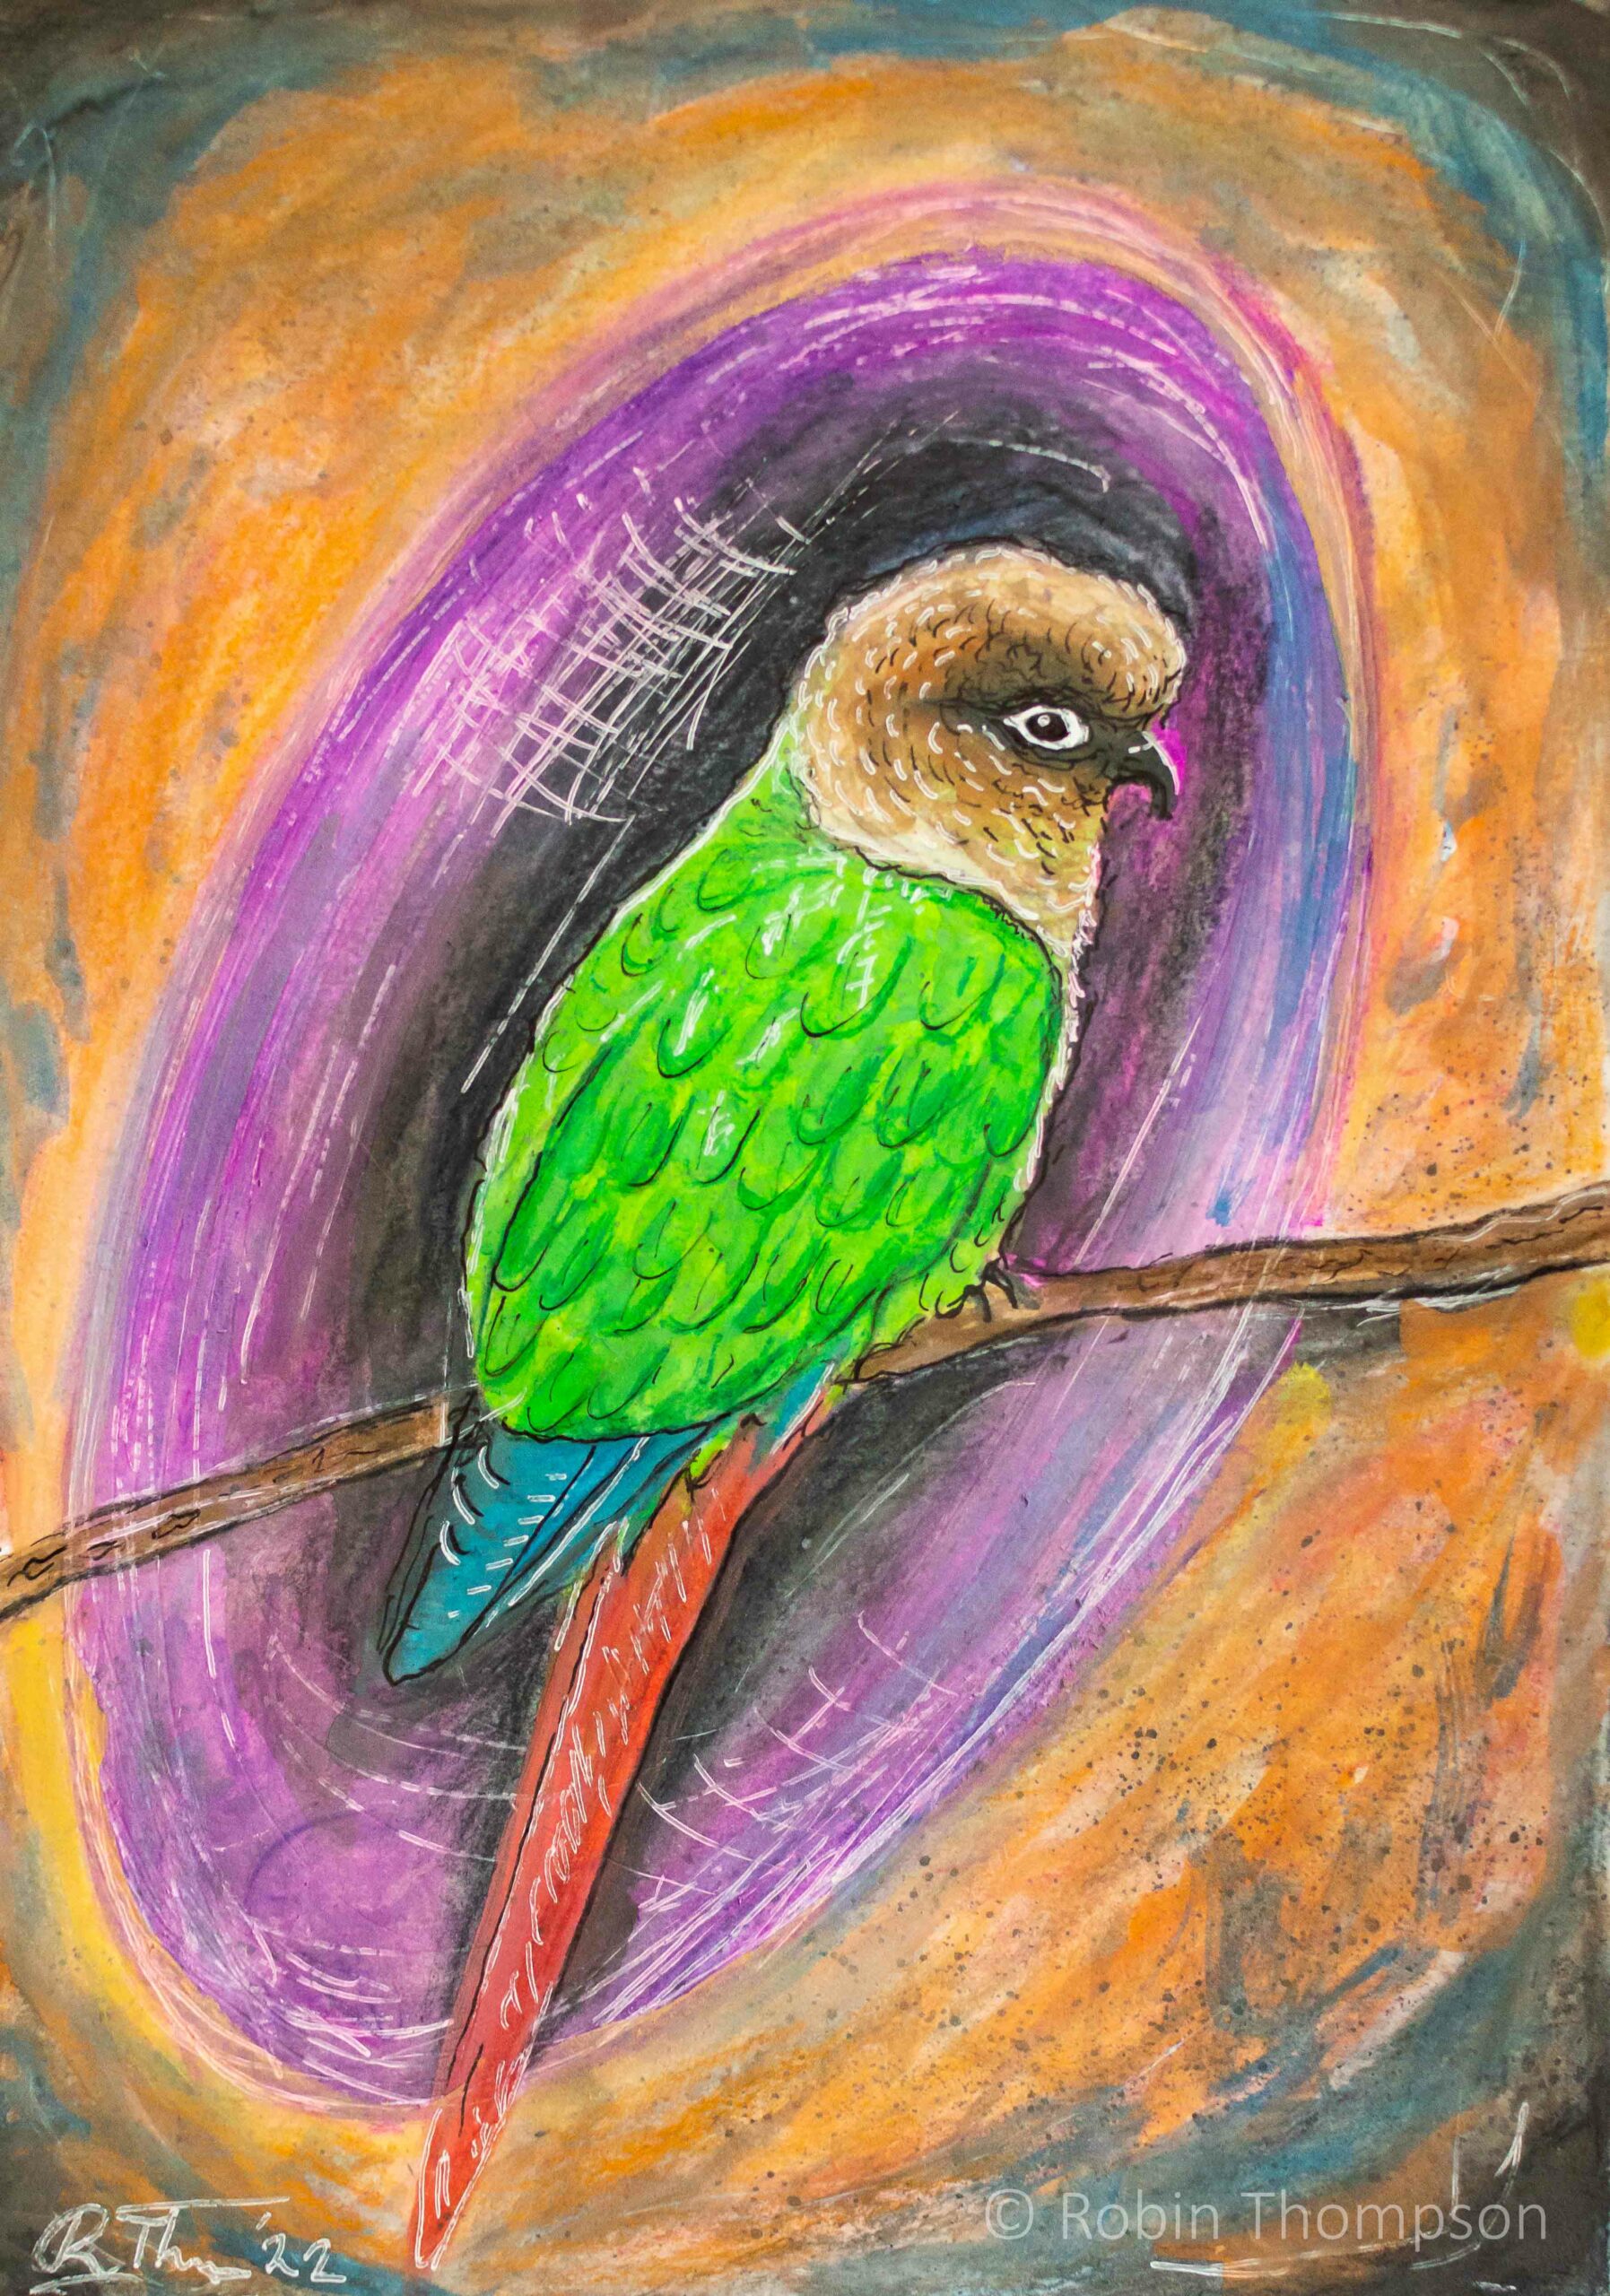 Watercolour and pencil drawing of a red, green and blue conure parrot/parakeet bird, The background is colourful and abstract, which adds a sense of playful mystery to the composition.